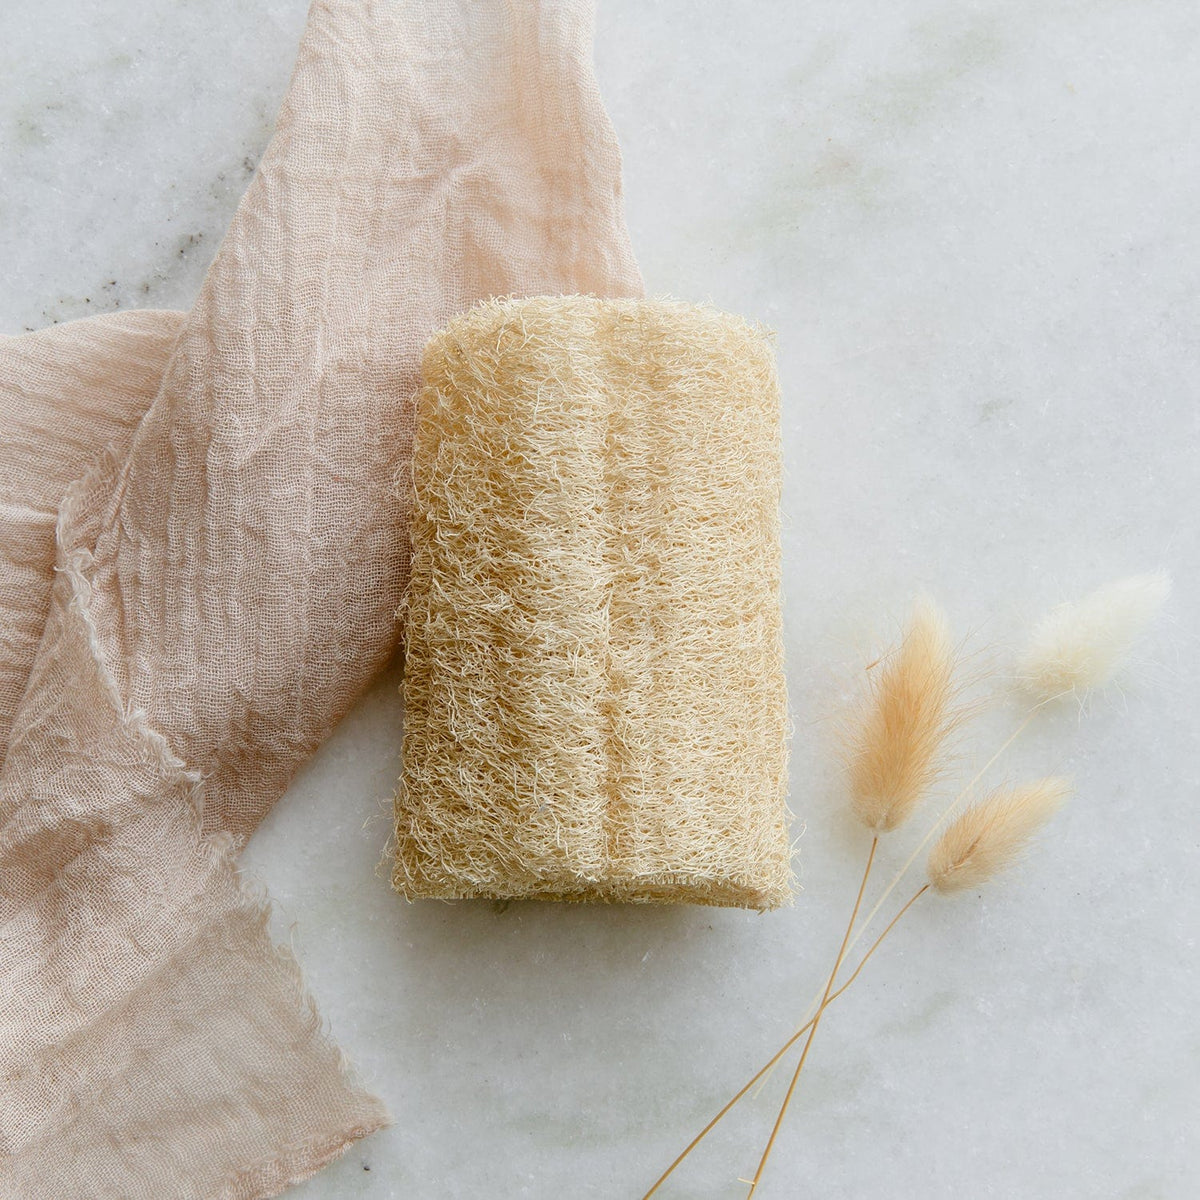 https://cdn.shopify.com/s/files/1/0617/2878/4620/products/zero-waste-store-single-loofah-scrubber-zero-waste-loofah-plastic-free-compostable-30751884476527_1200x.jpg?v=1697565499